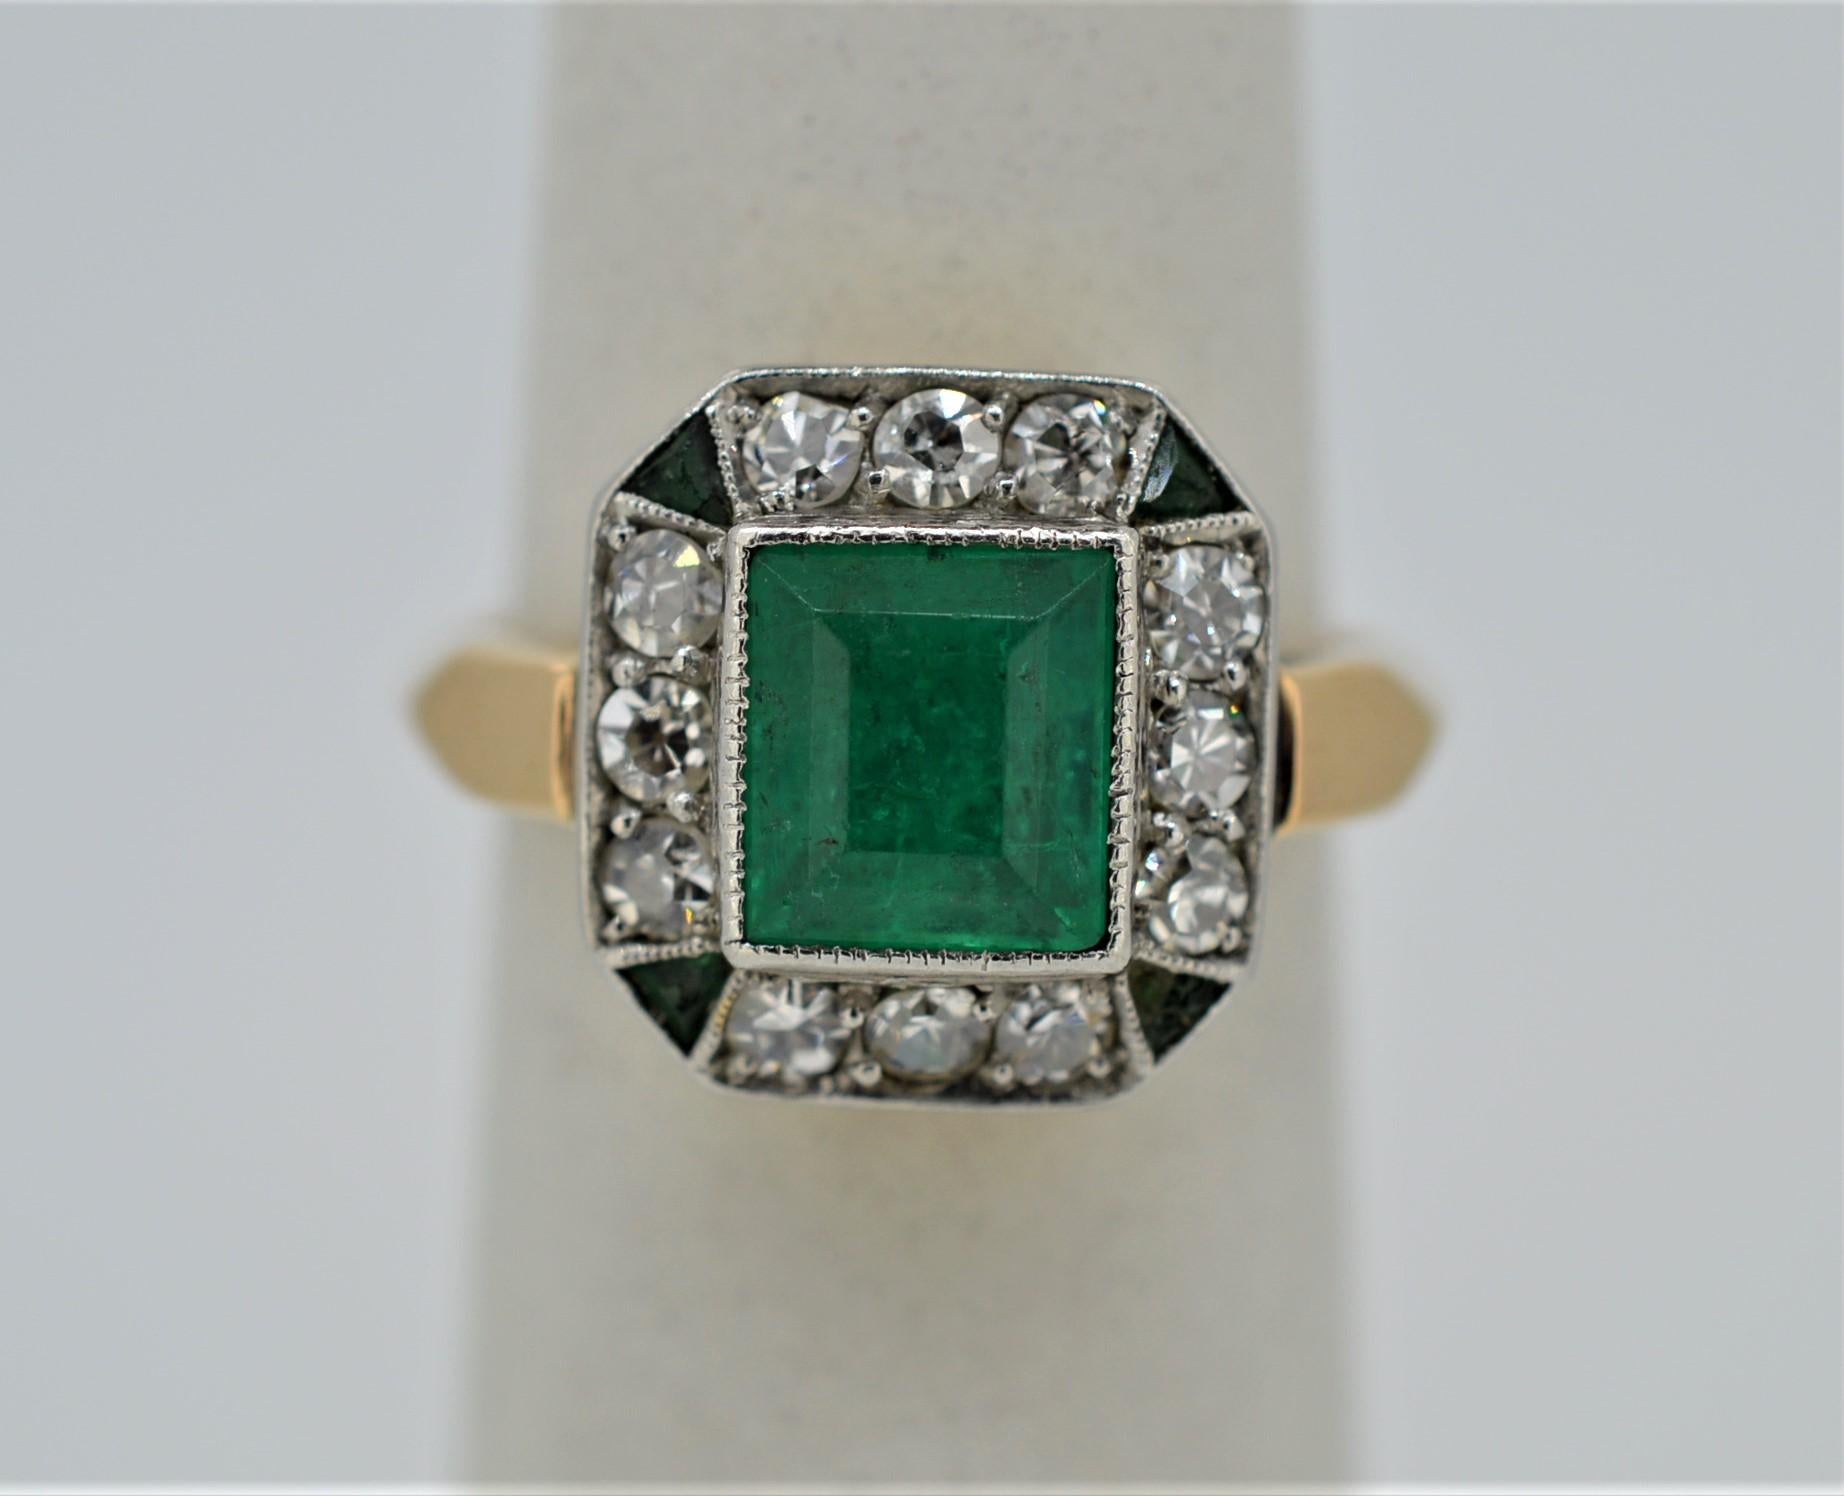 Elegant antique emerald and diamond fourteen karat yellow gold and platinum ring featuring a 1.25 carat soft green natural emerald center stone measuring 6.25 x 7.25 framed with 
twelve Miner's cut diamonds, H/SI2 when graded in the setting with an